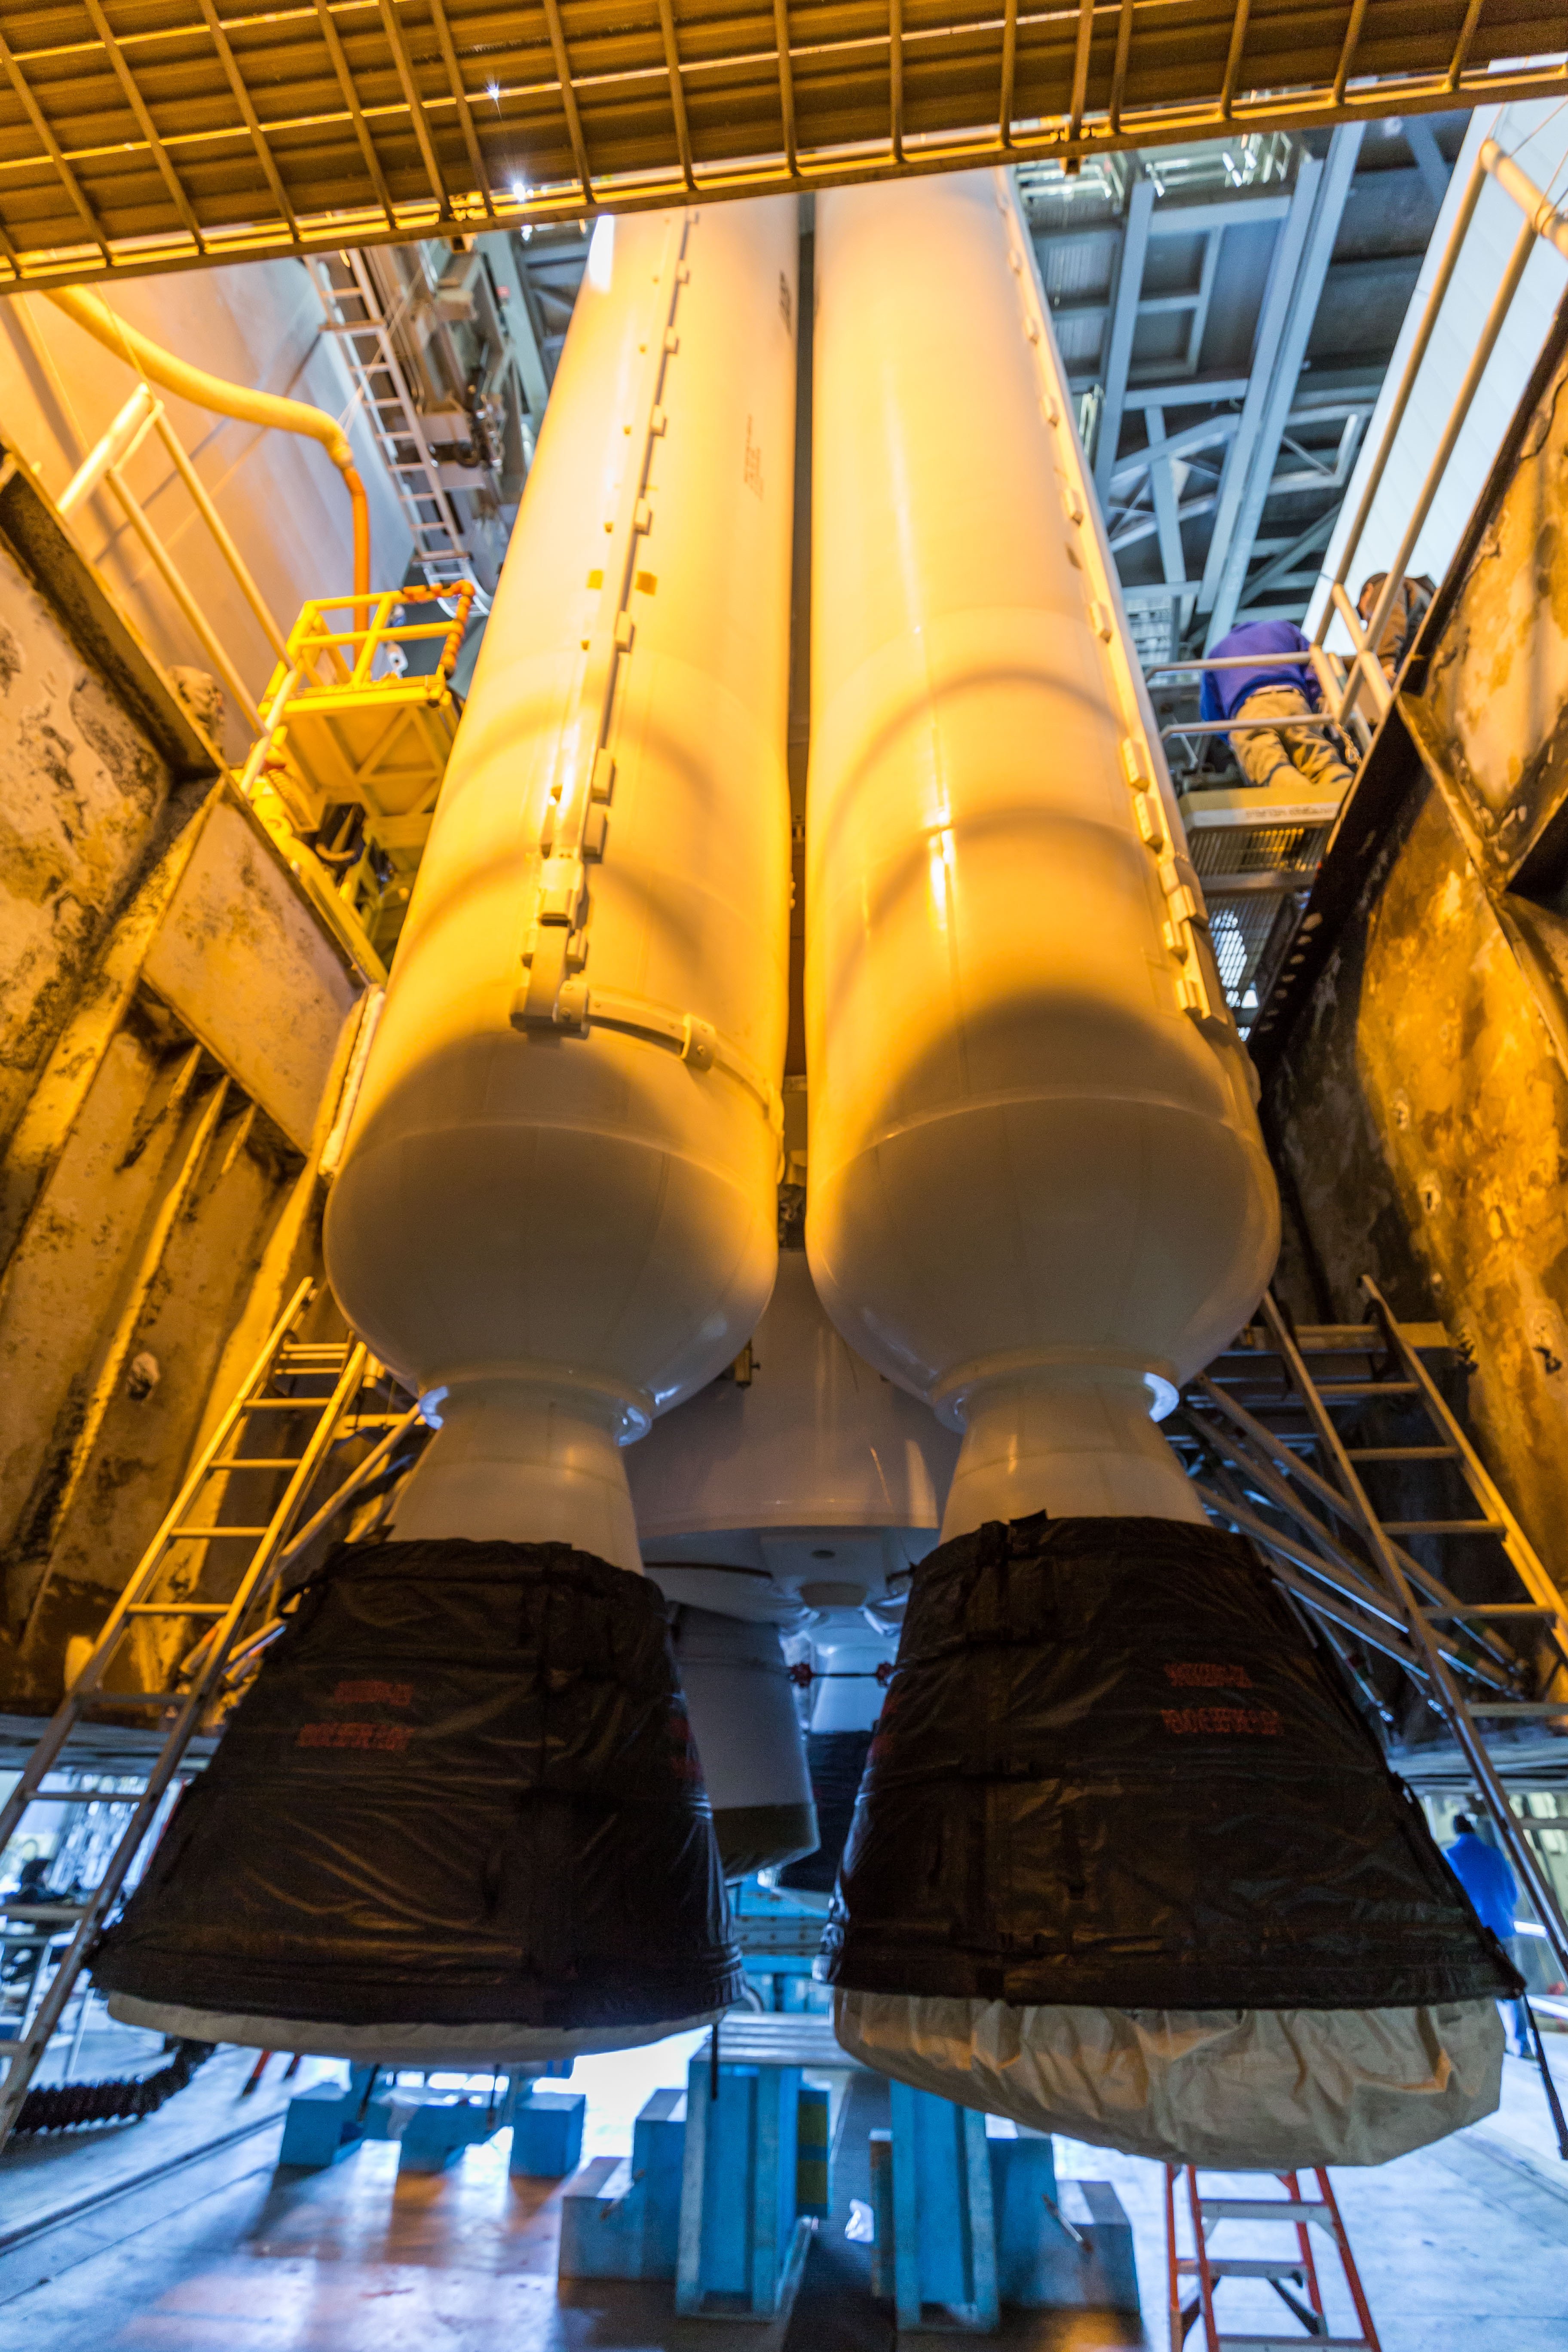 The solid rocket boosters were attached to the first stage during stacking operations. Photo by United Launch Alliance